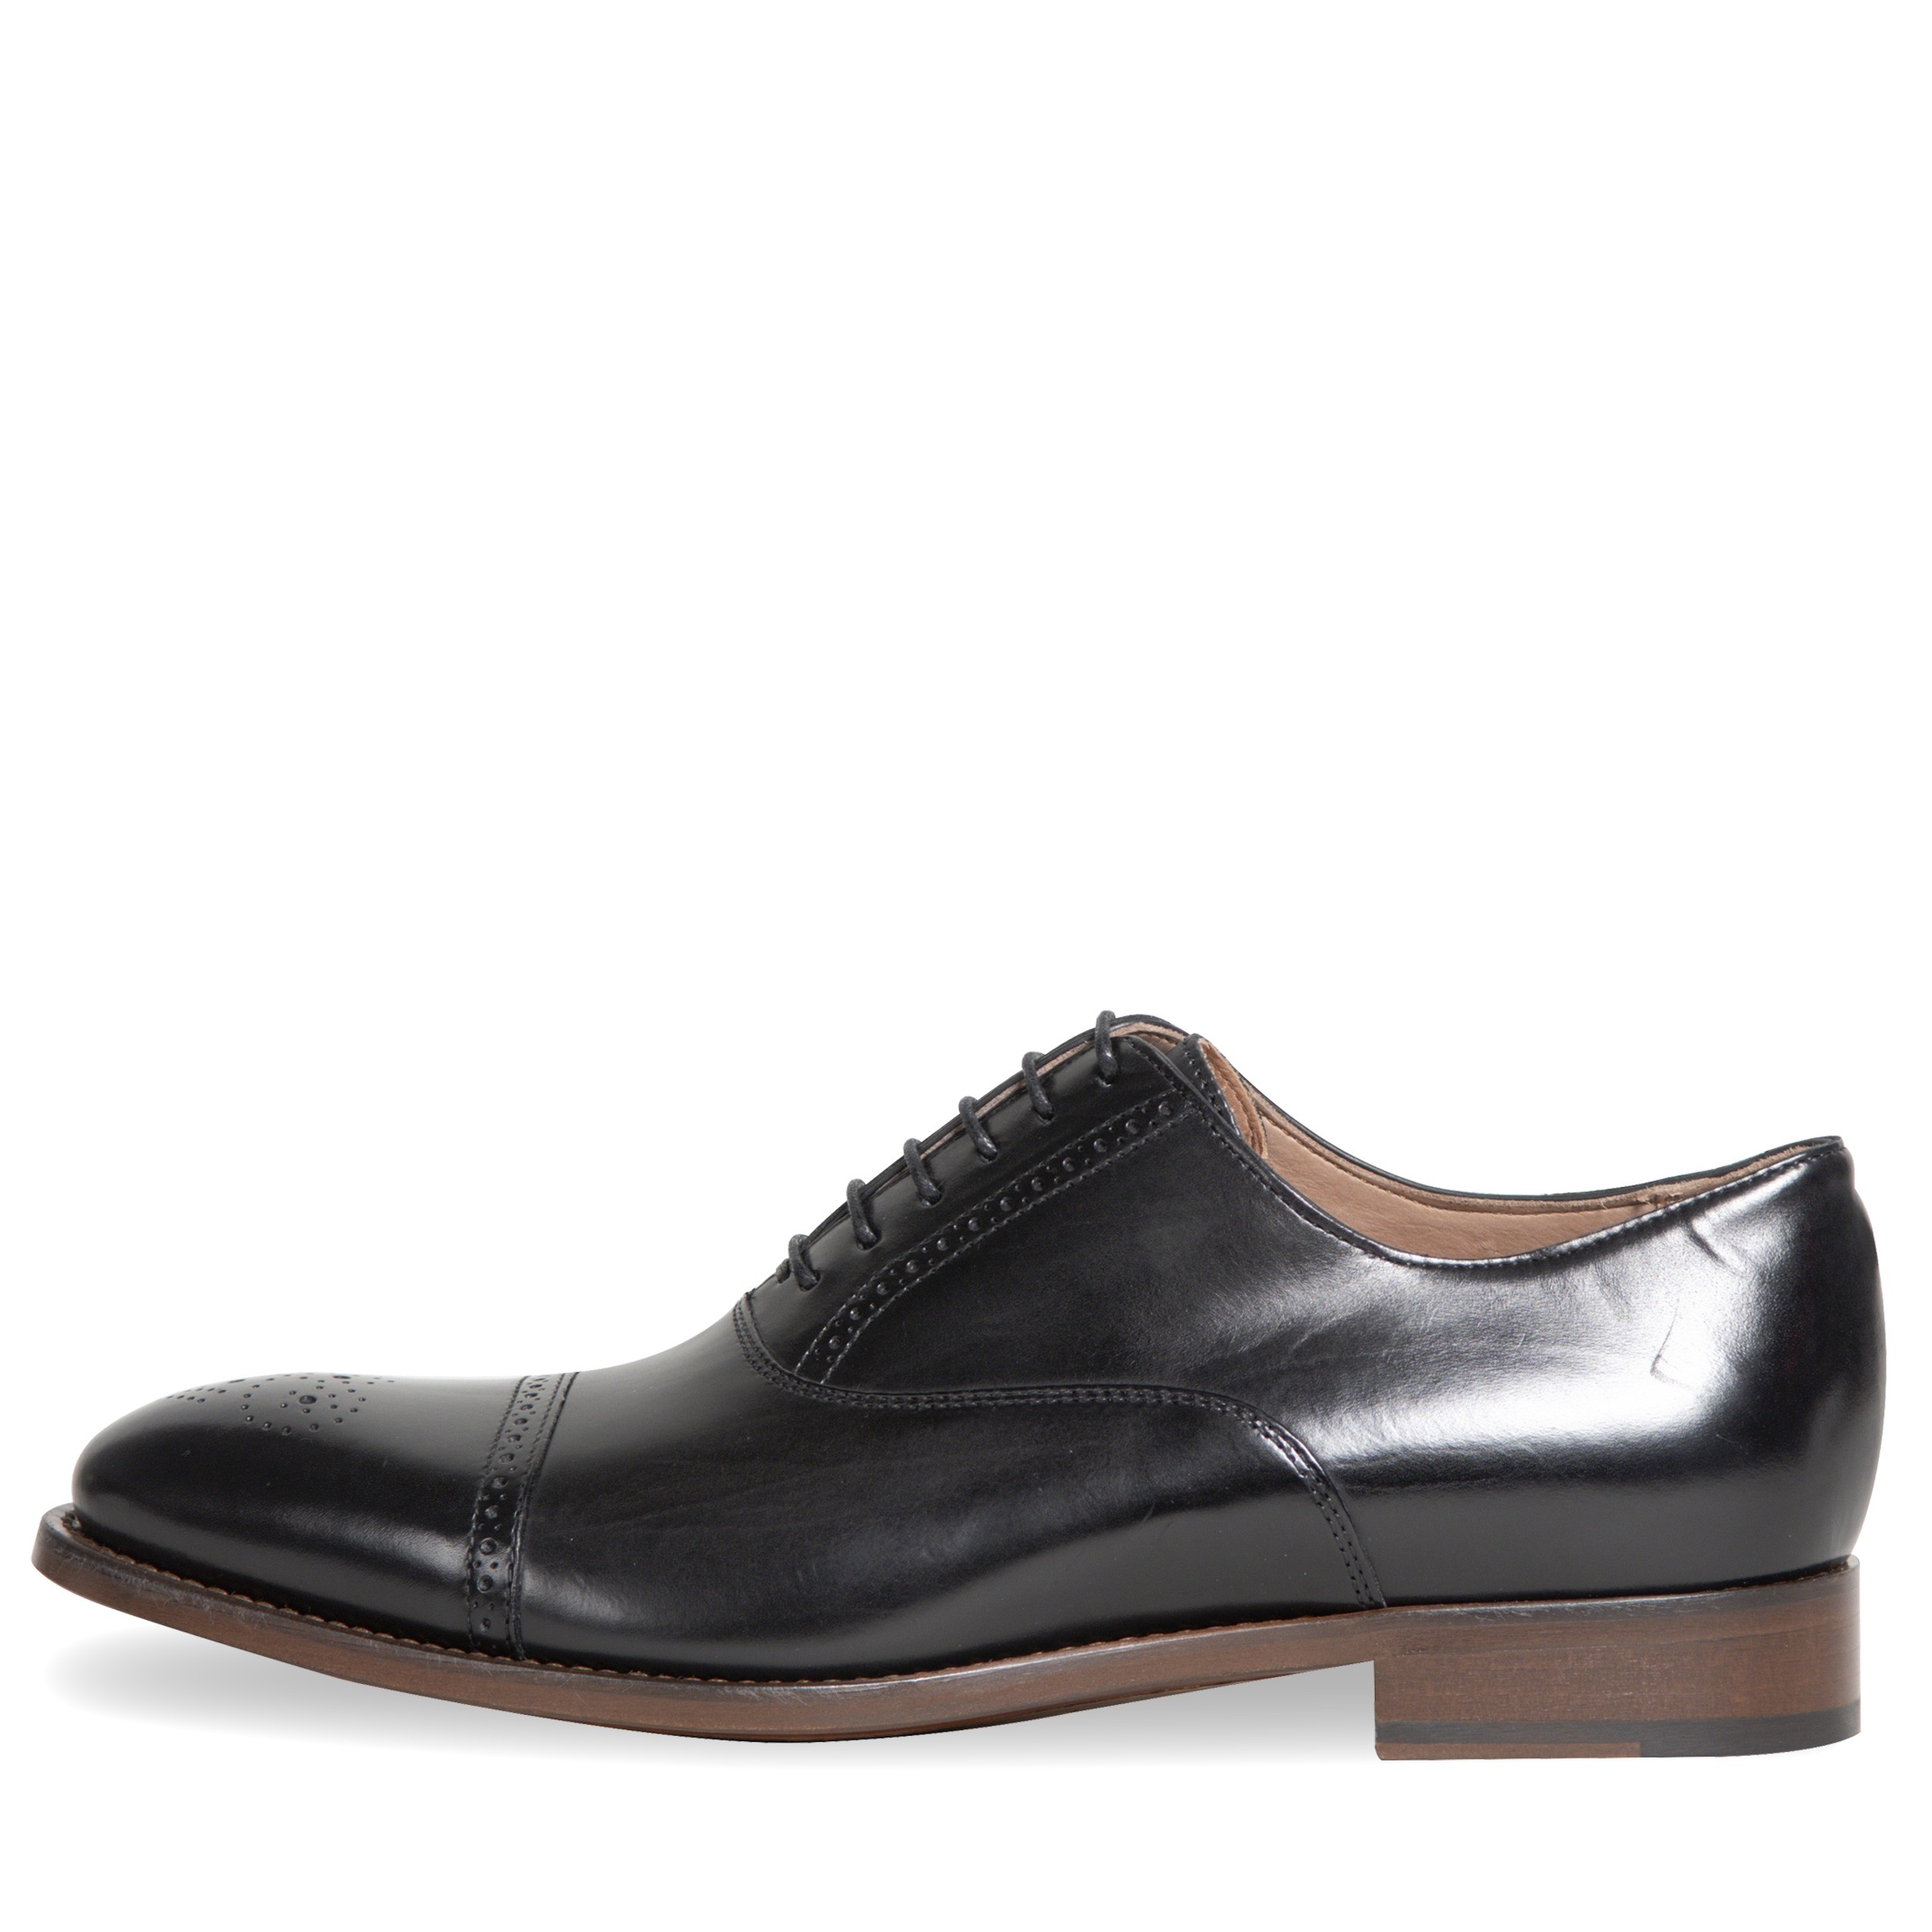 Paul Smith Shoes Berty Calf Leather Lace Up Shoe Black